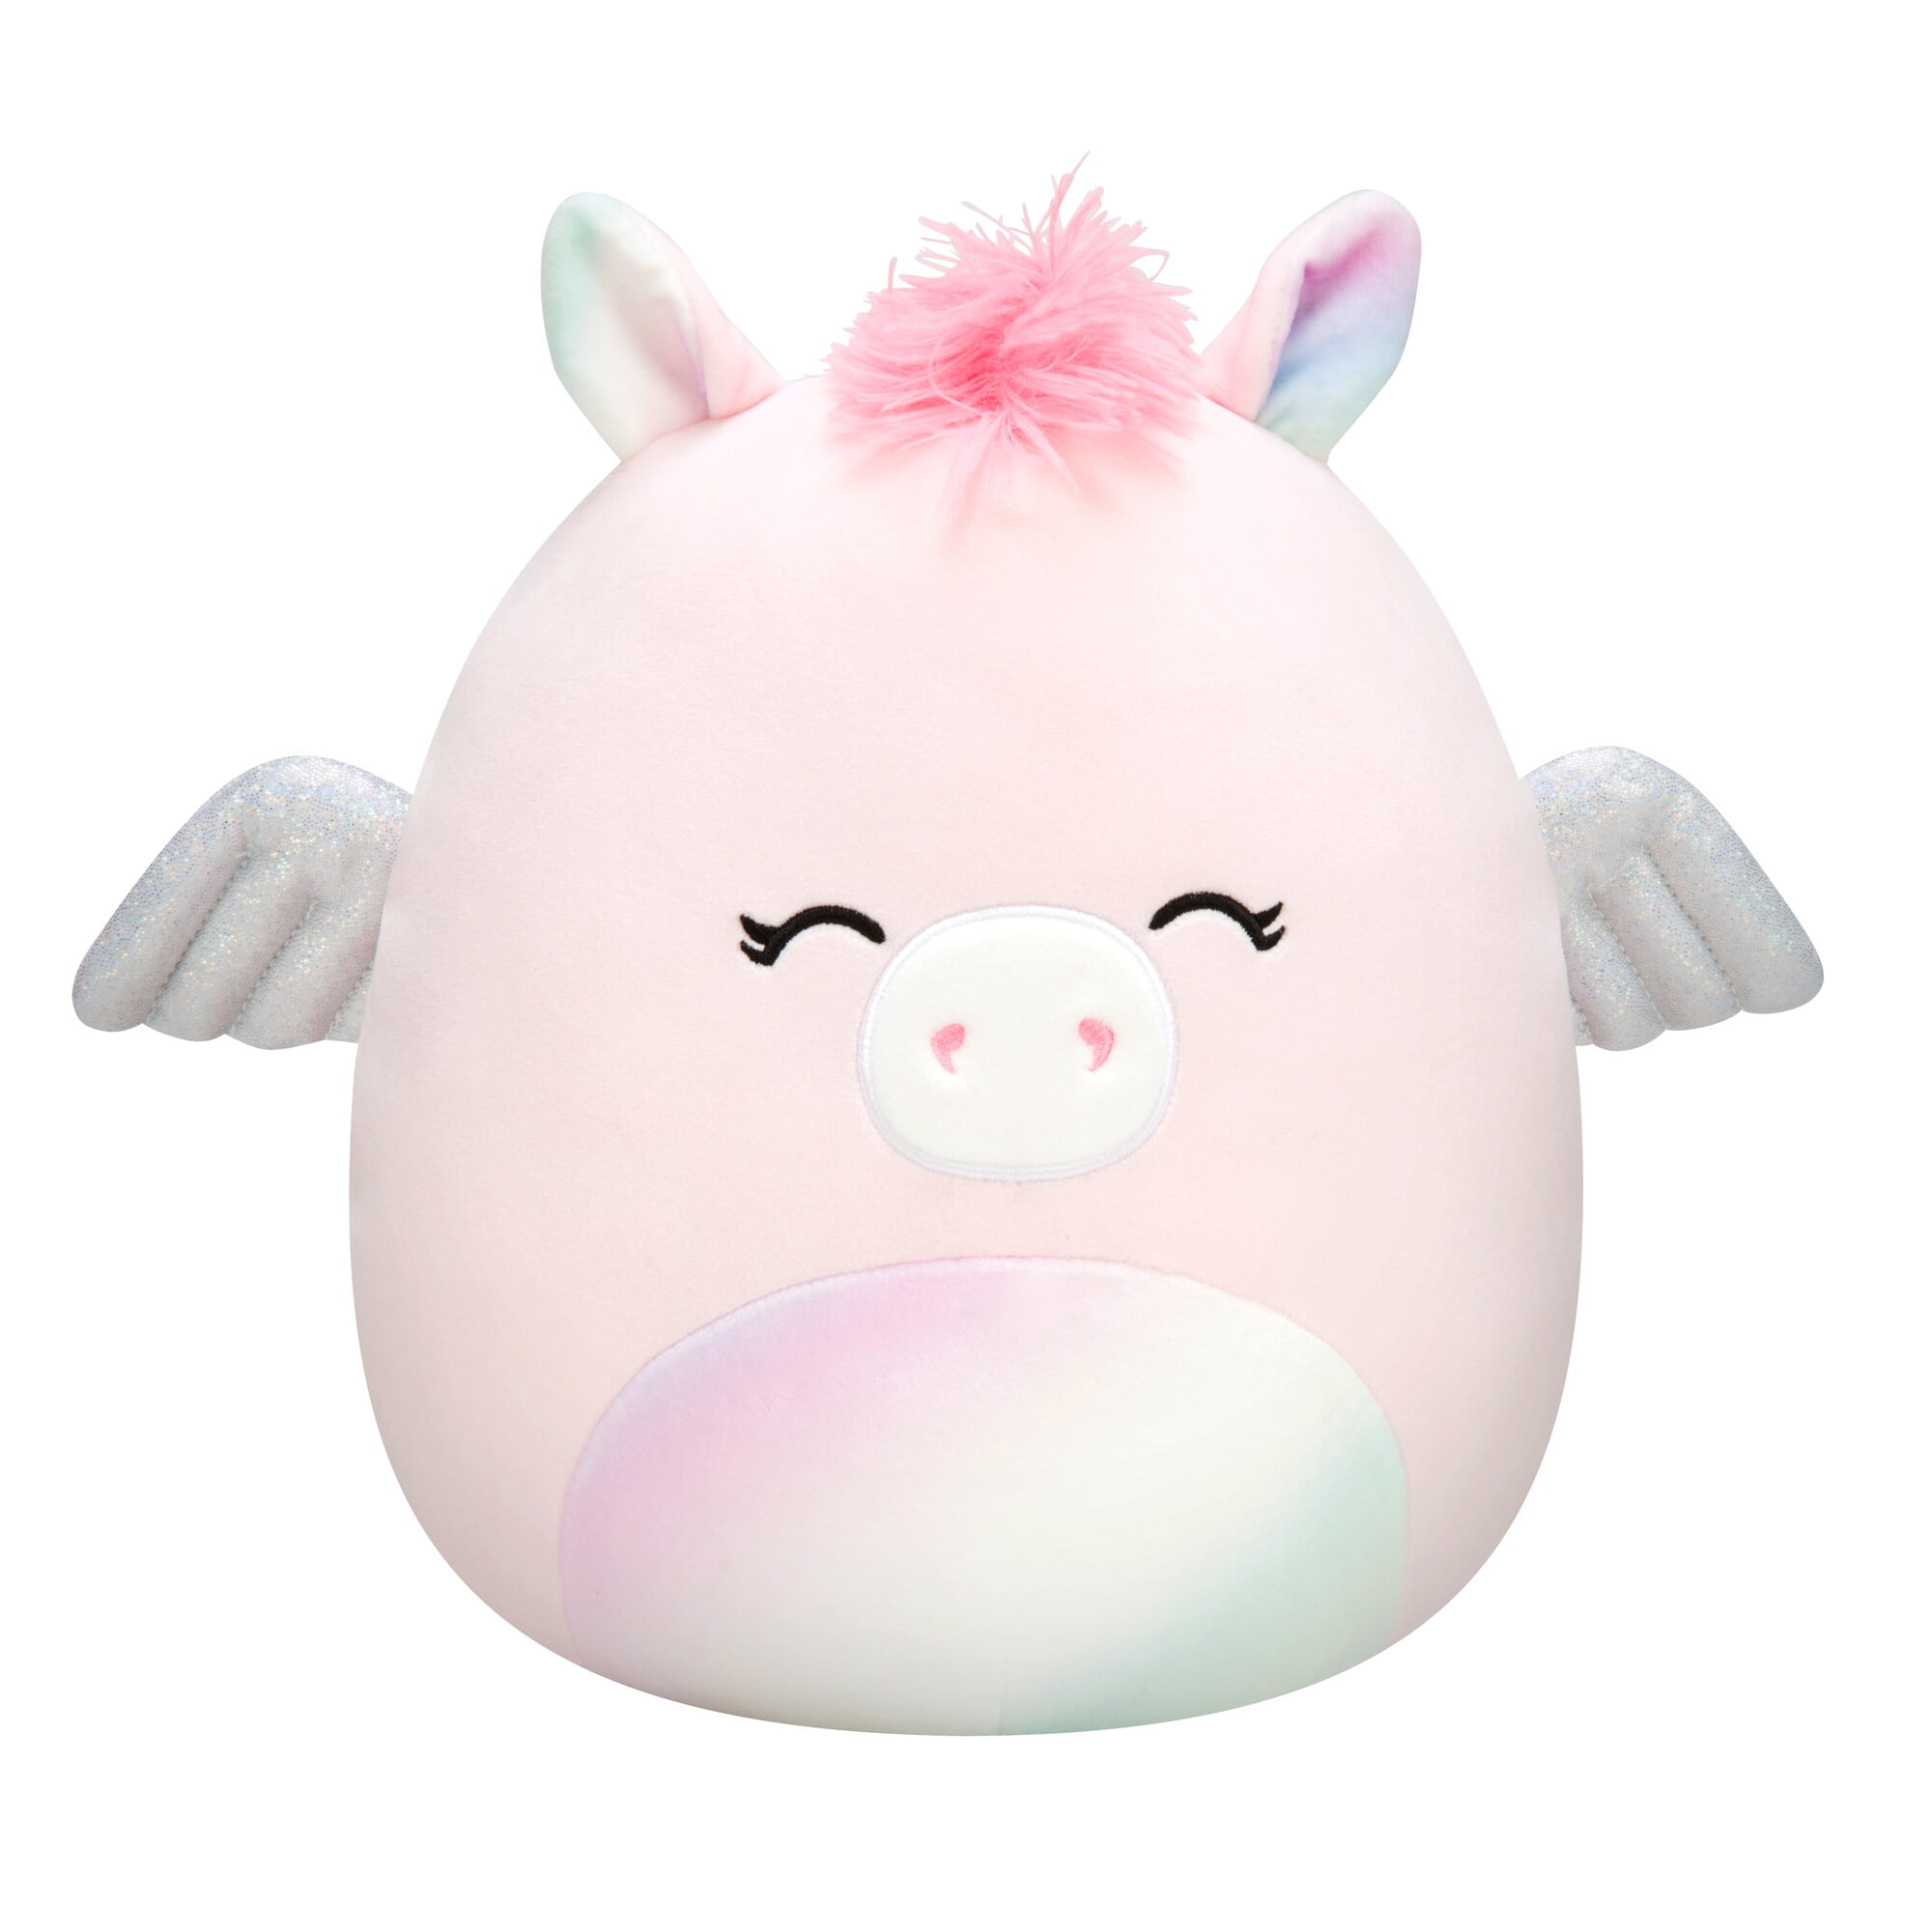 Kellytoy Squishmallow Hans The Hedgehog Pink Heart Sprinkles Plush 8" GUC for sale online 